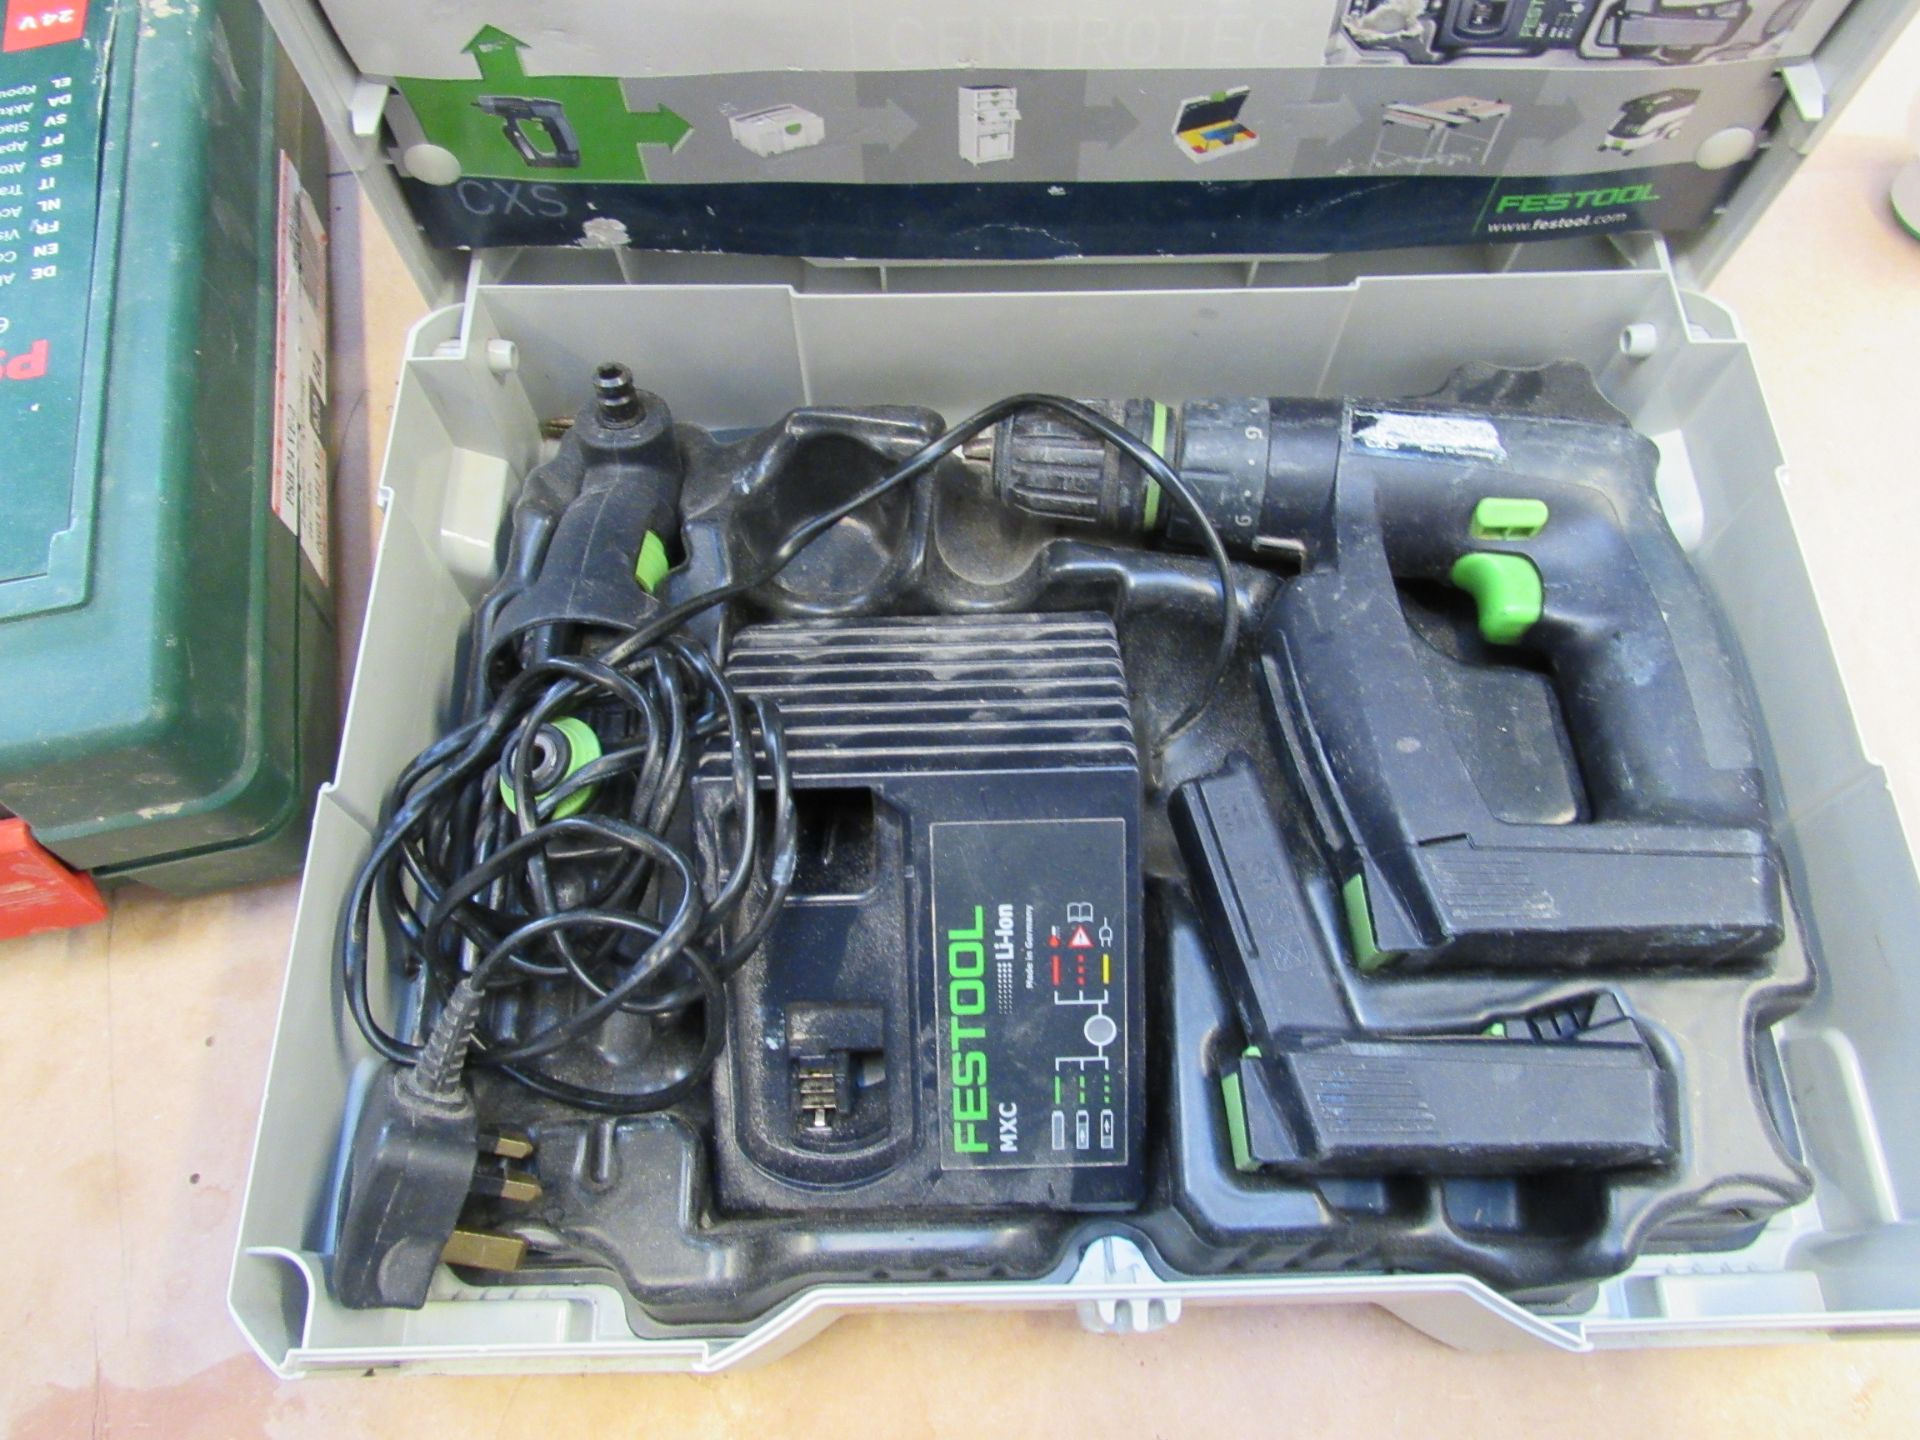 Festool CXSU Li 1.3 GB Drill Driver, 2 batteries, charger and case - Image 2 of 4